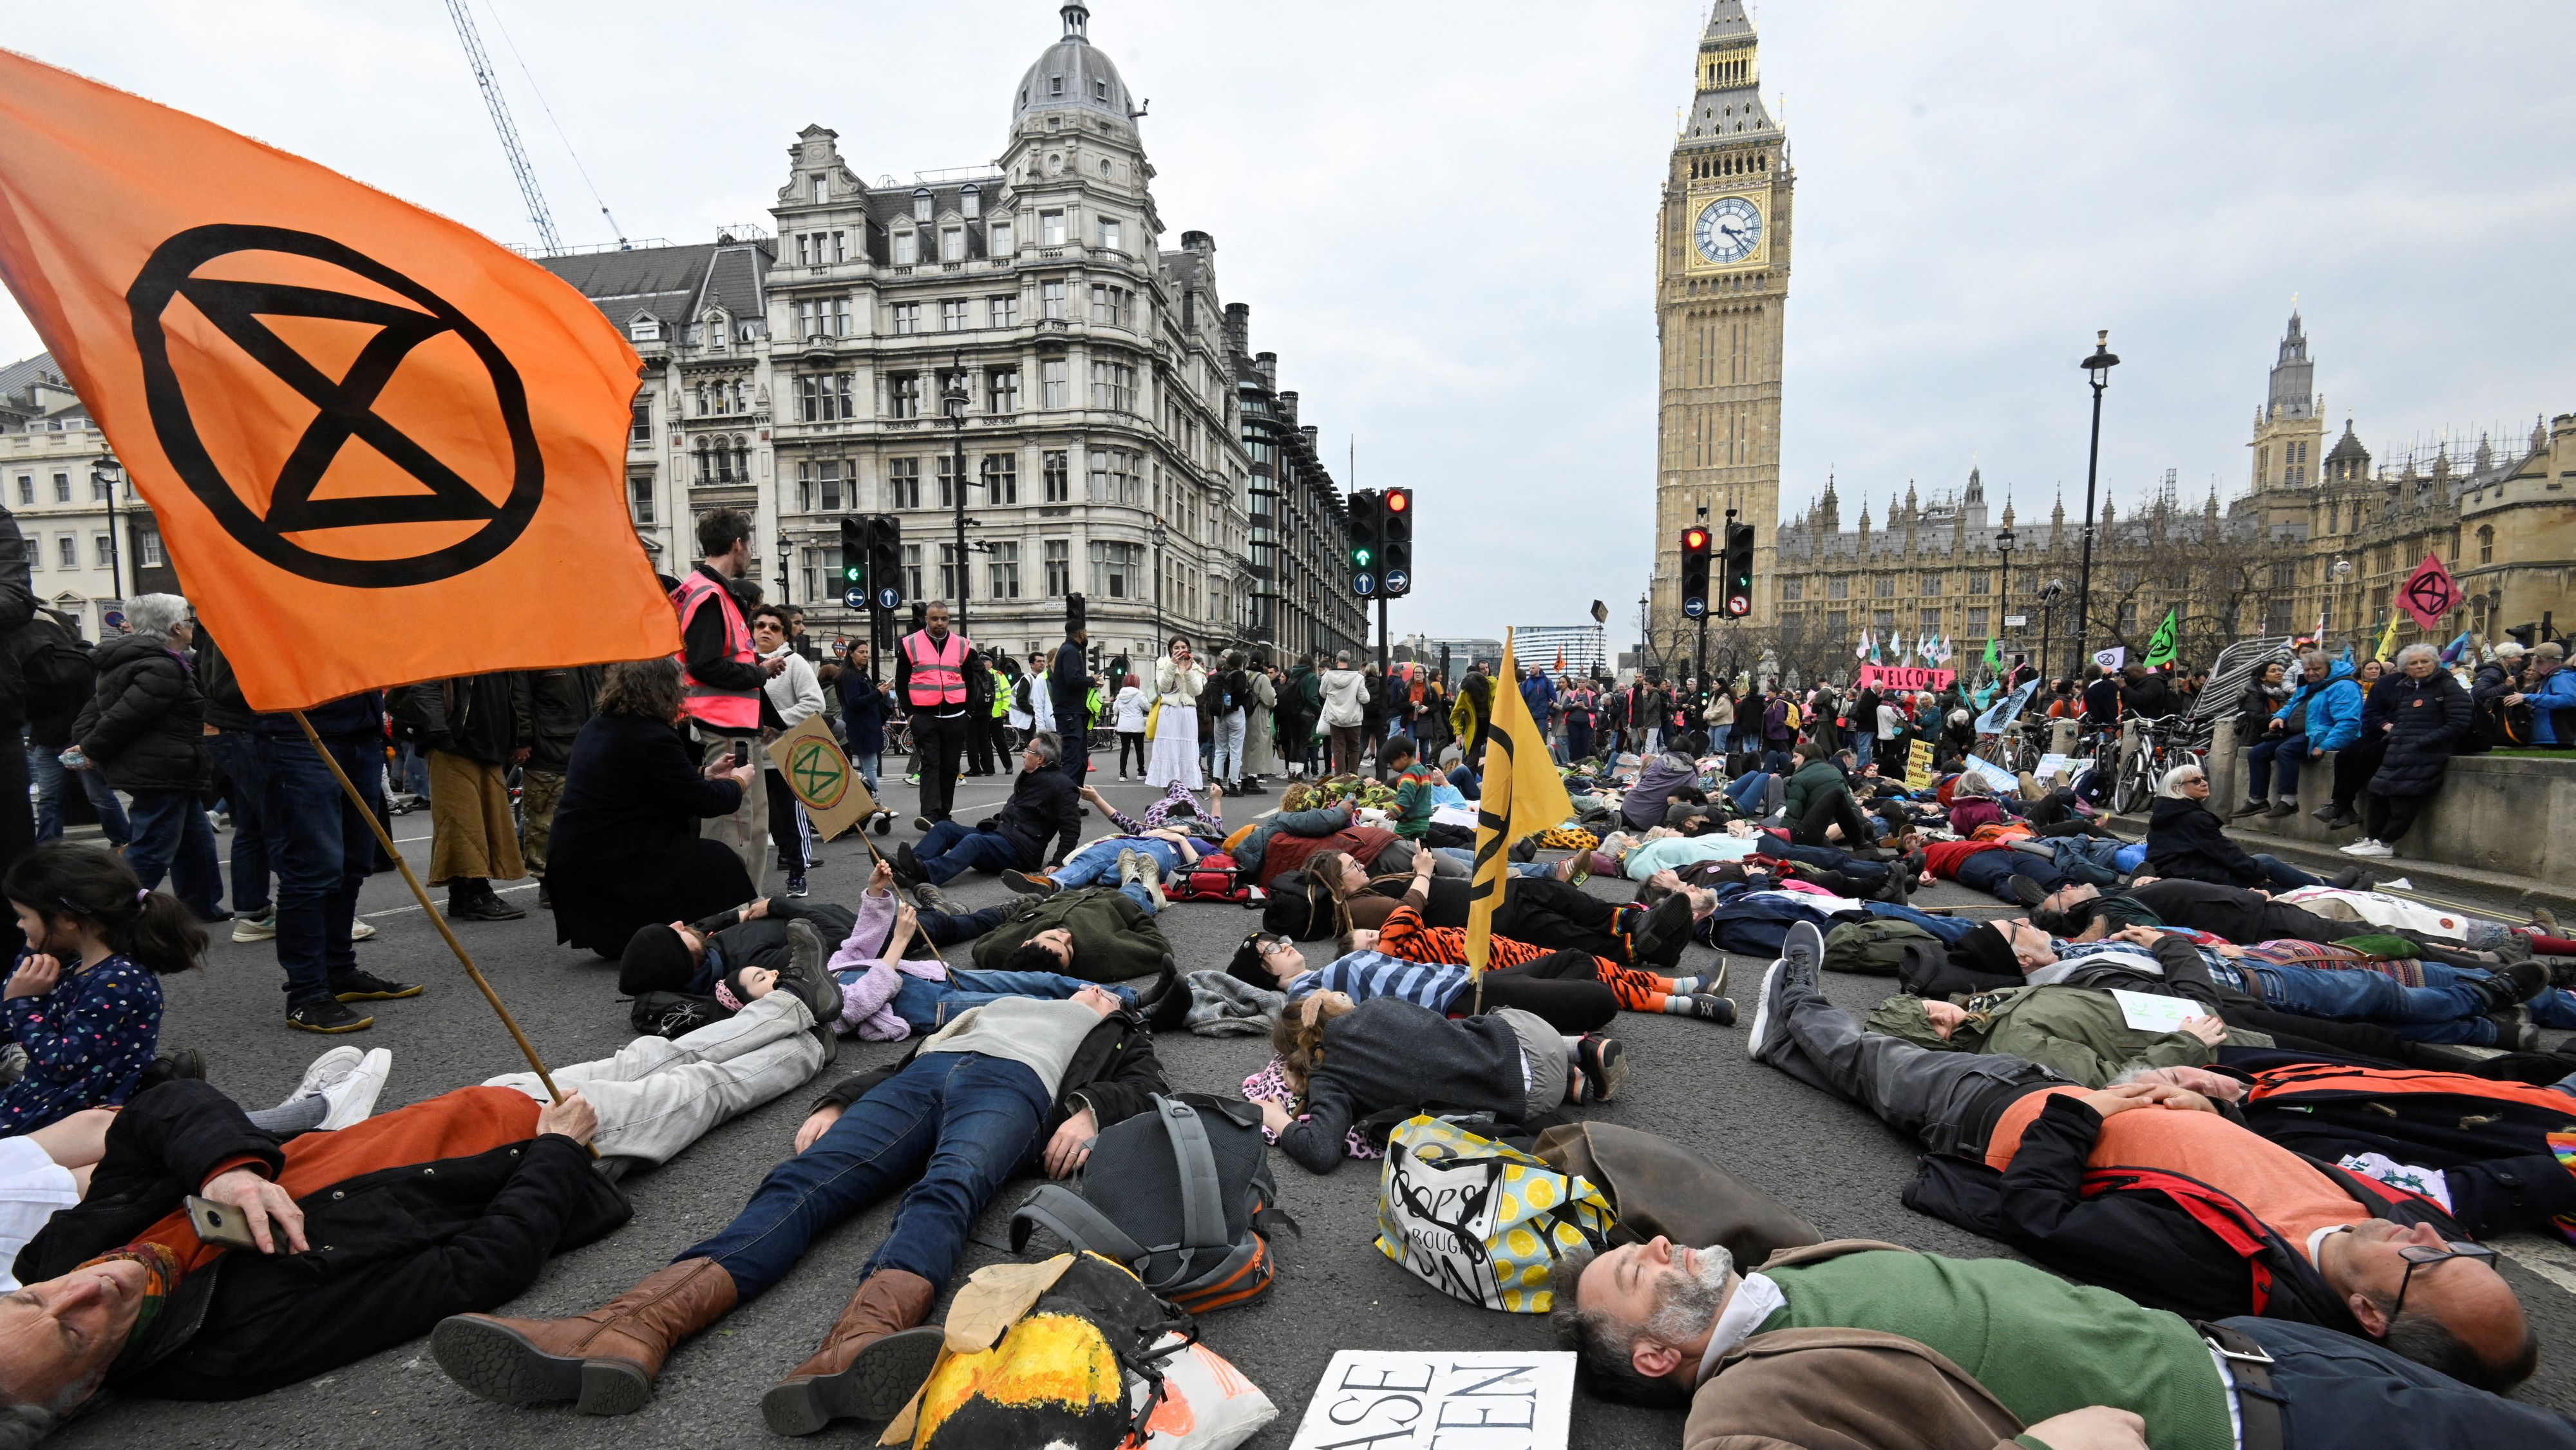 Activists perform a 'die-in' in Parliament Square in London, /Toby Melville/Reuters